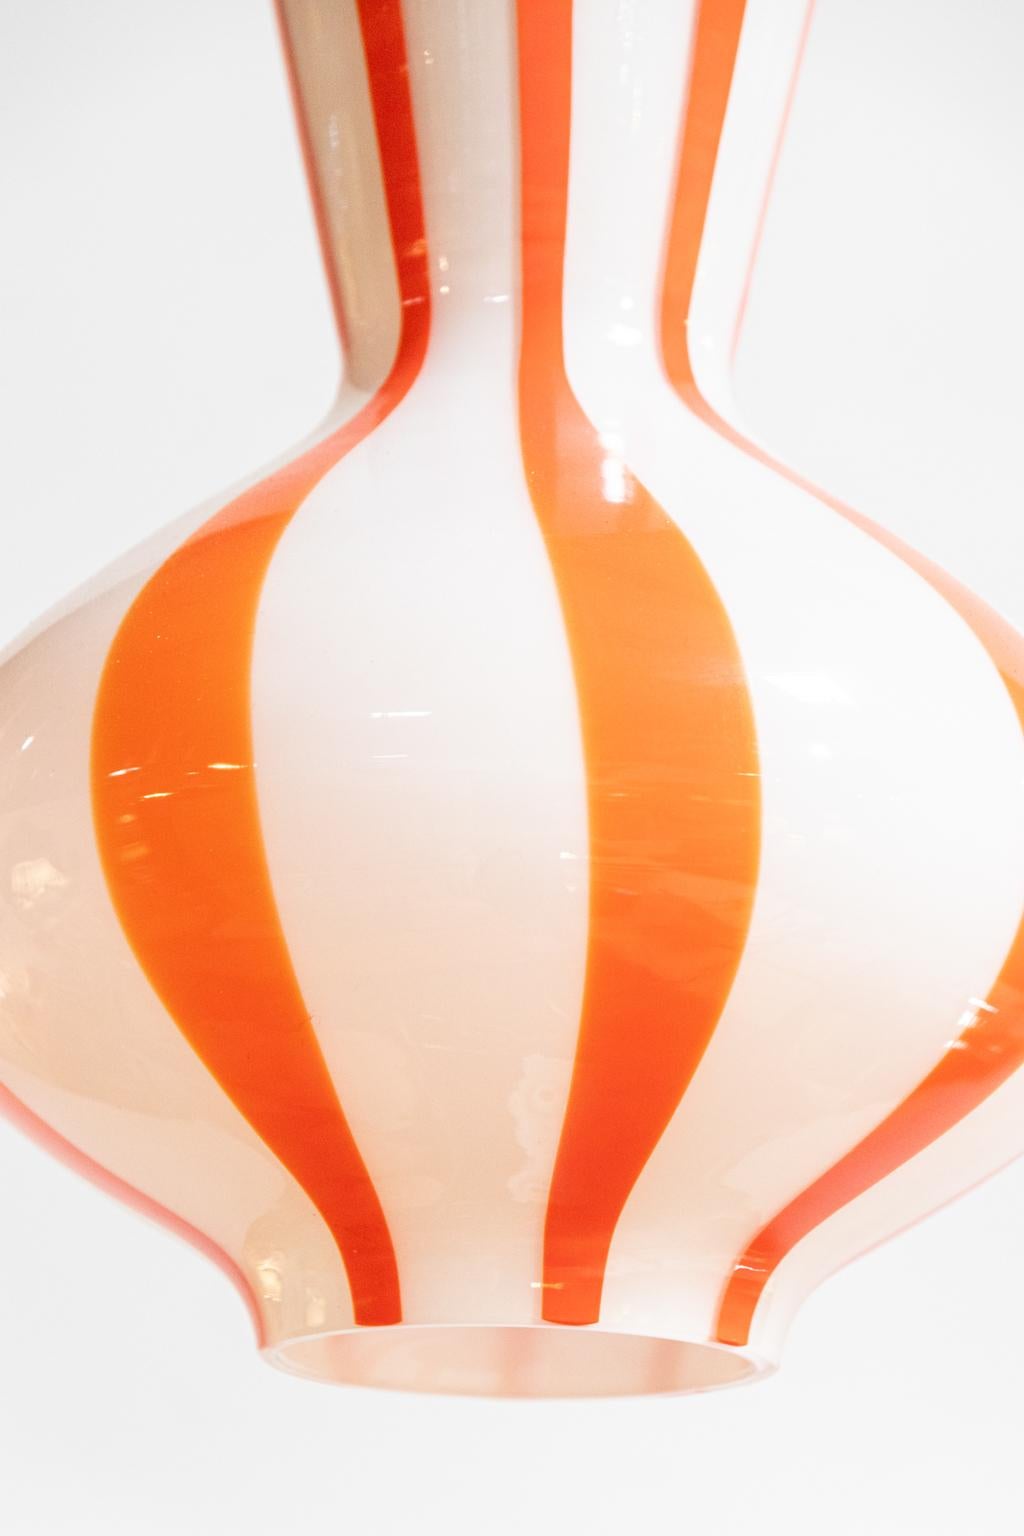 Mid-Century Modern circa 1950s Murano Hanging Glass in Orange and White For Sale